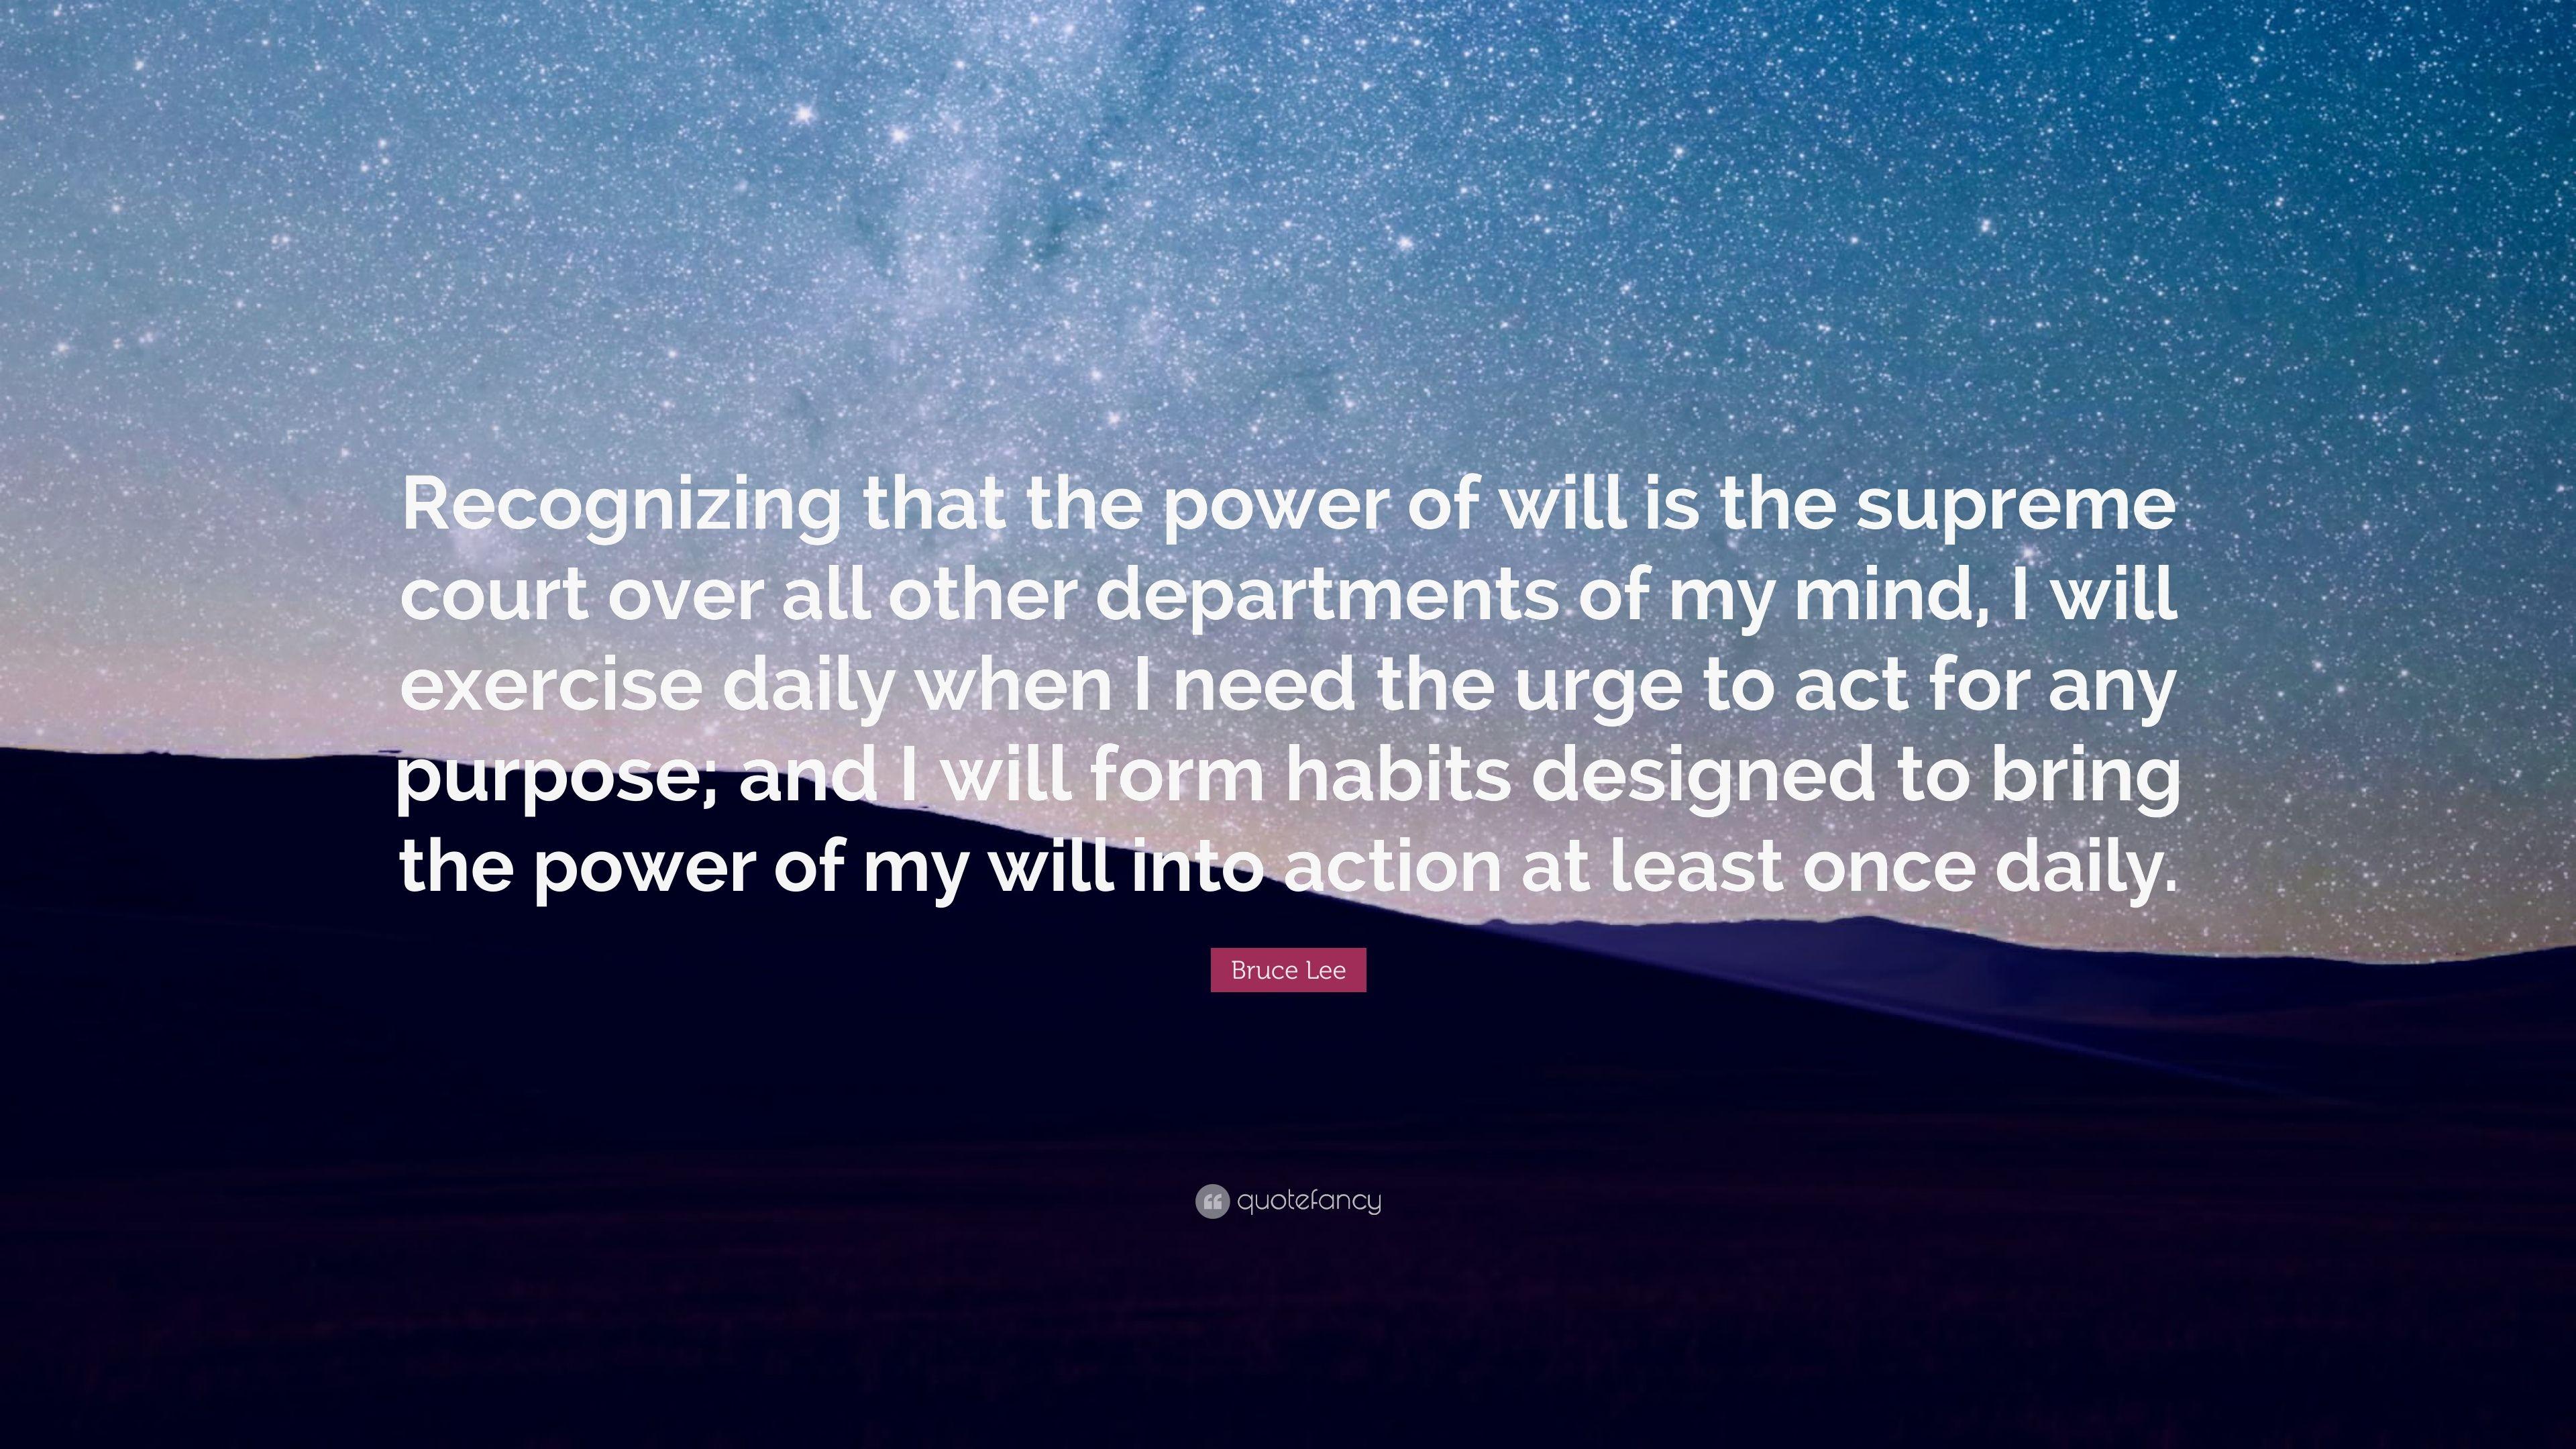 Bruce Lee Quote: “Recognizing that the power of will is